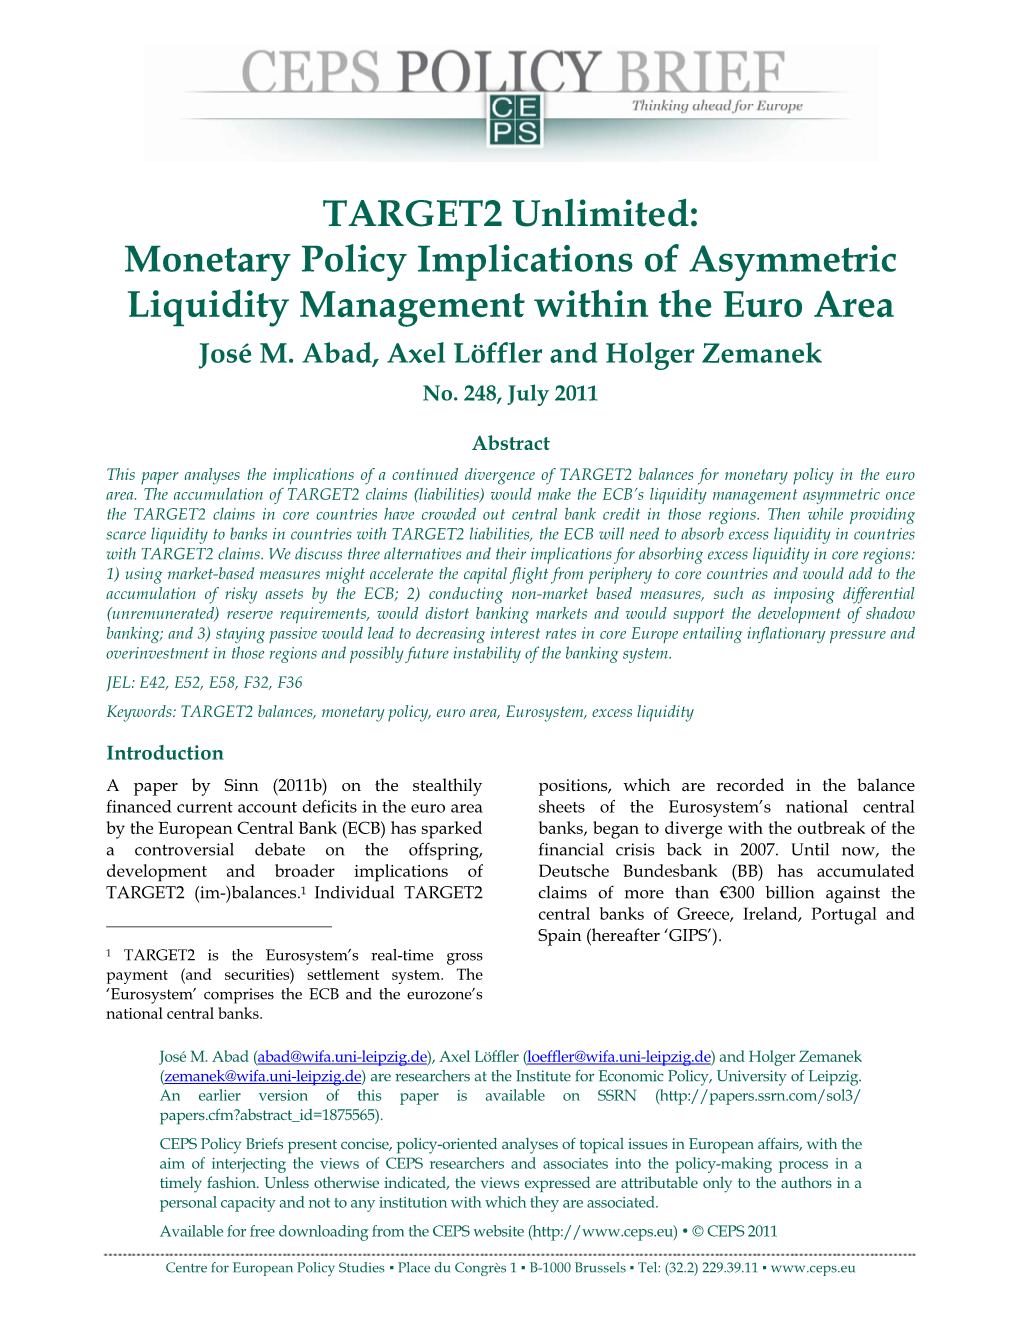 TARGET2 Unlimited: Monetary Policy Implications of Asymmetric Liquidity Management Within the Euro Area José M